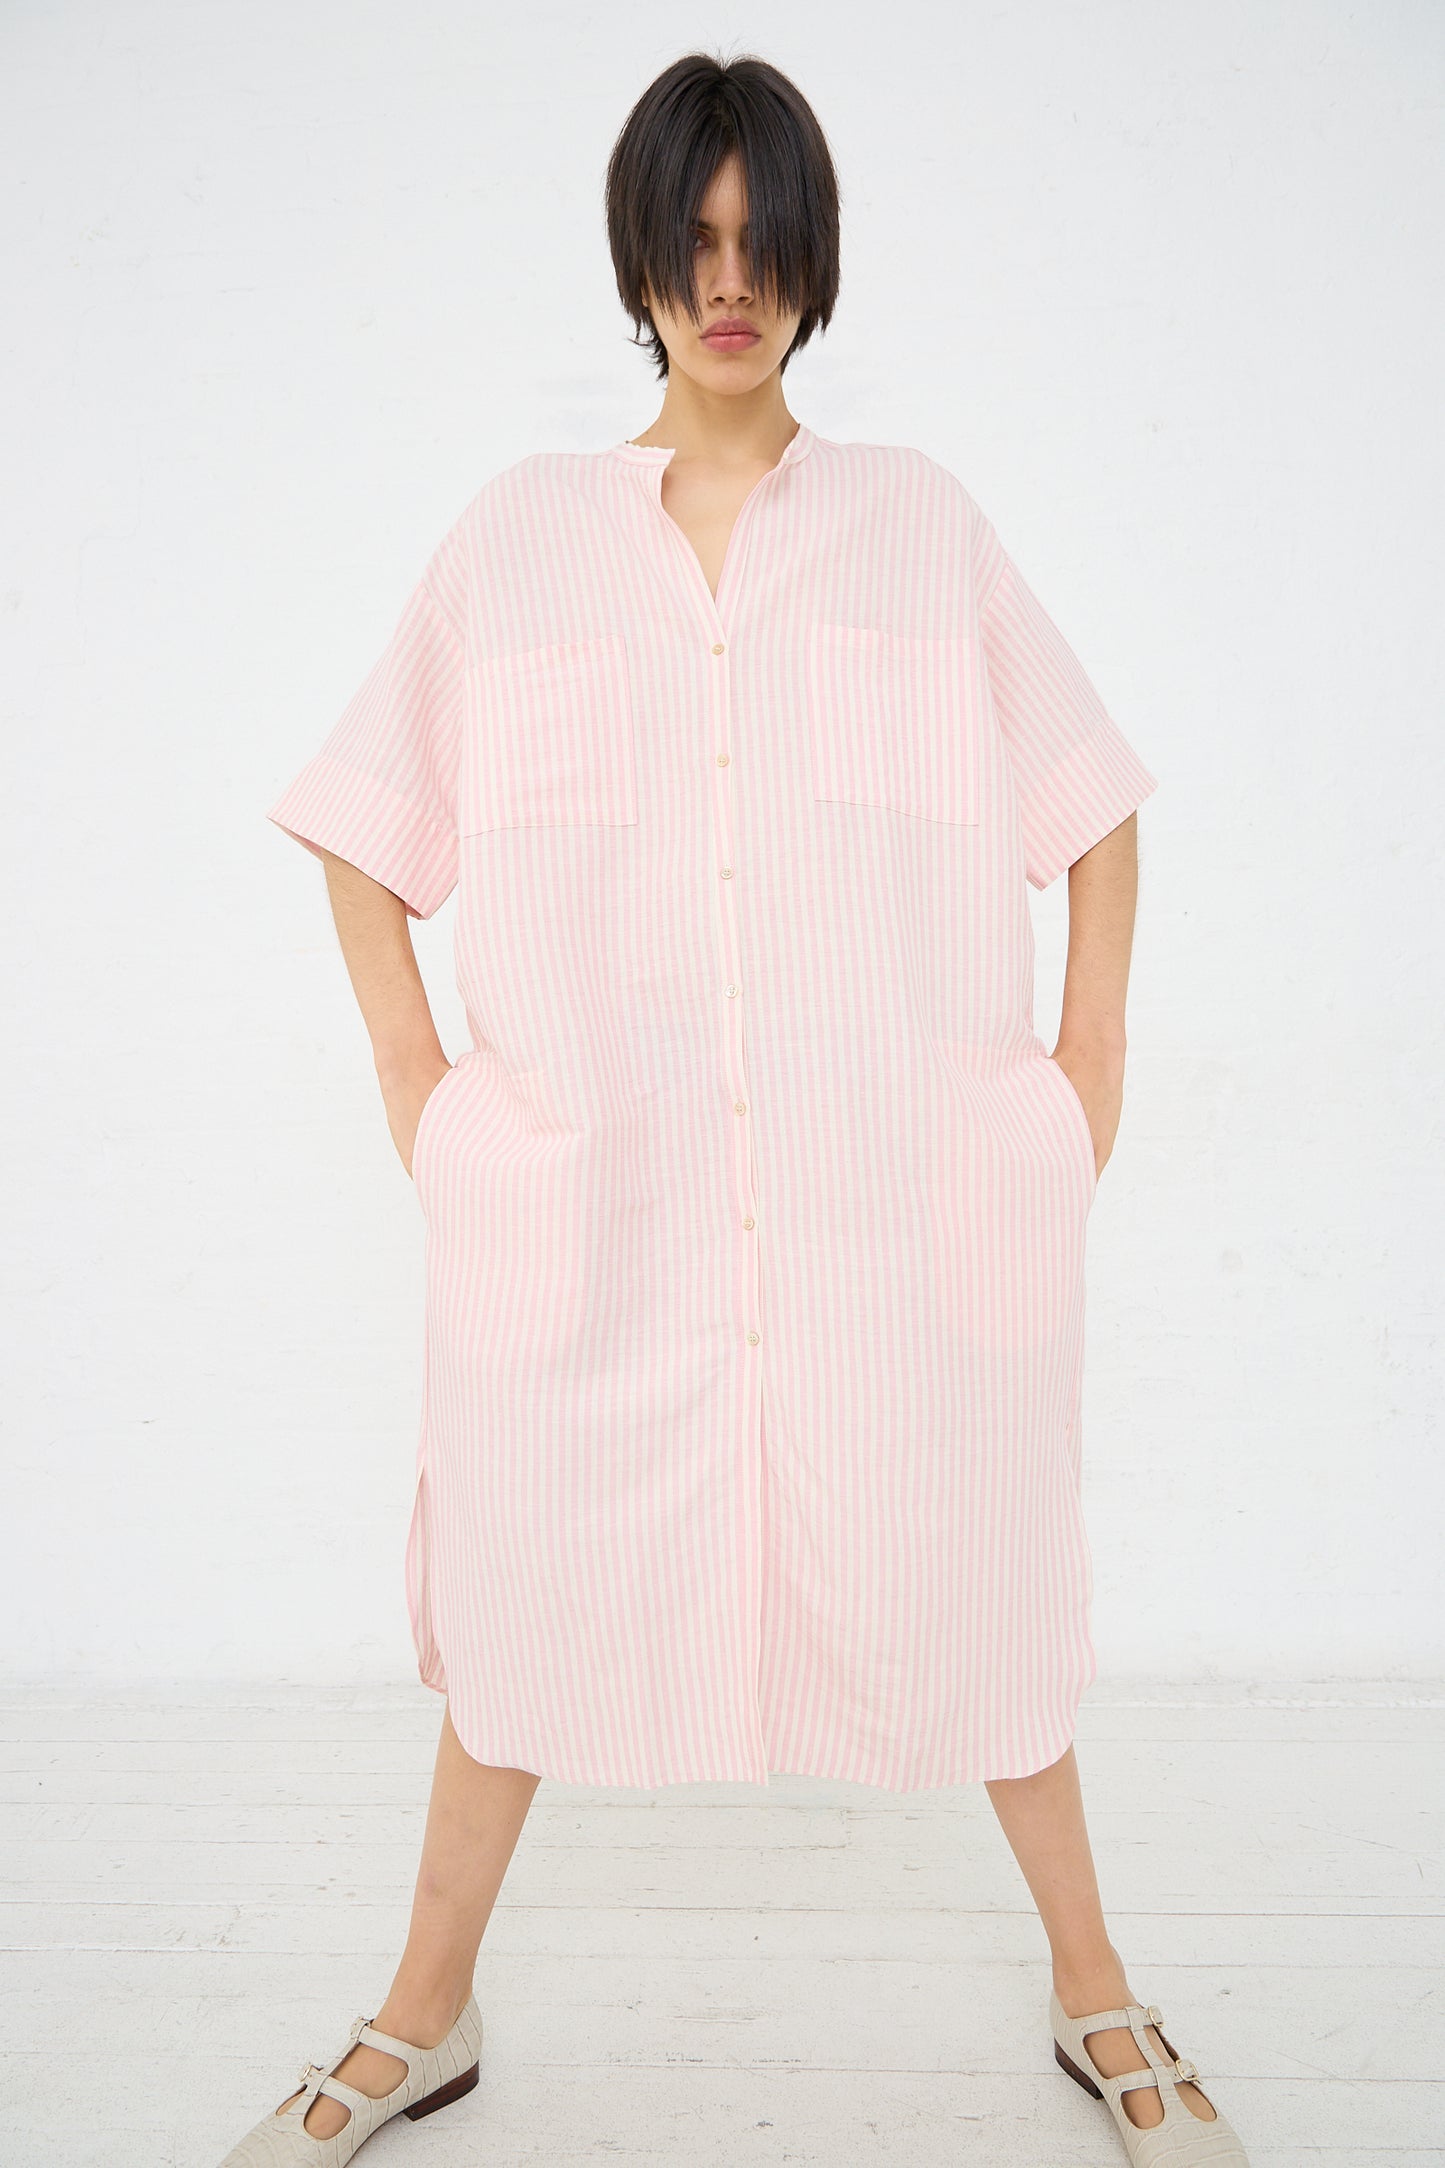 Woman in an oversized Caron Callahan Linen Stripe Kalloni Dress in Pink standing against a white background.